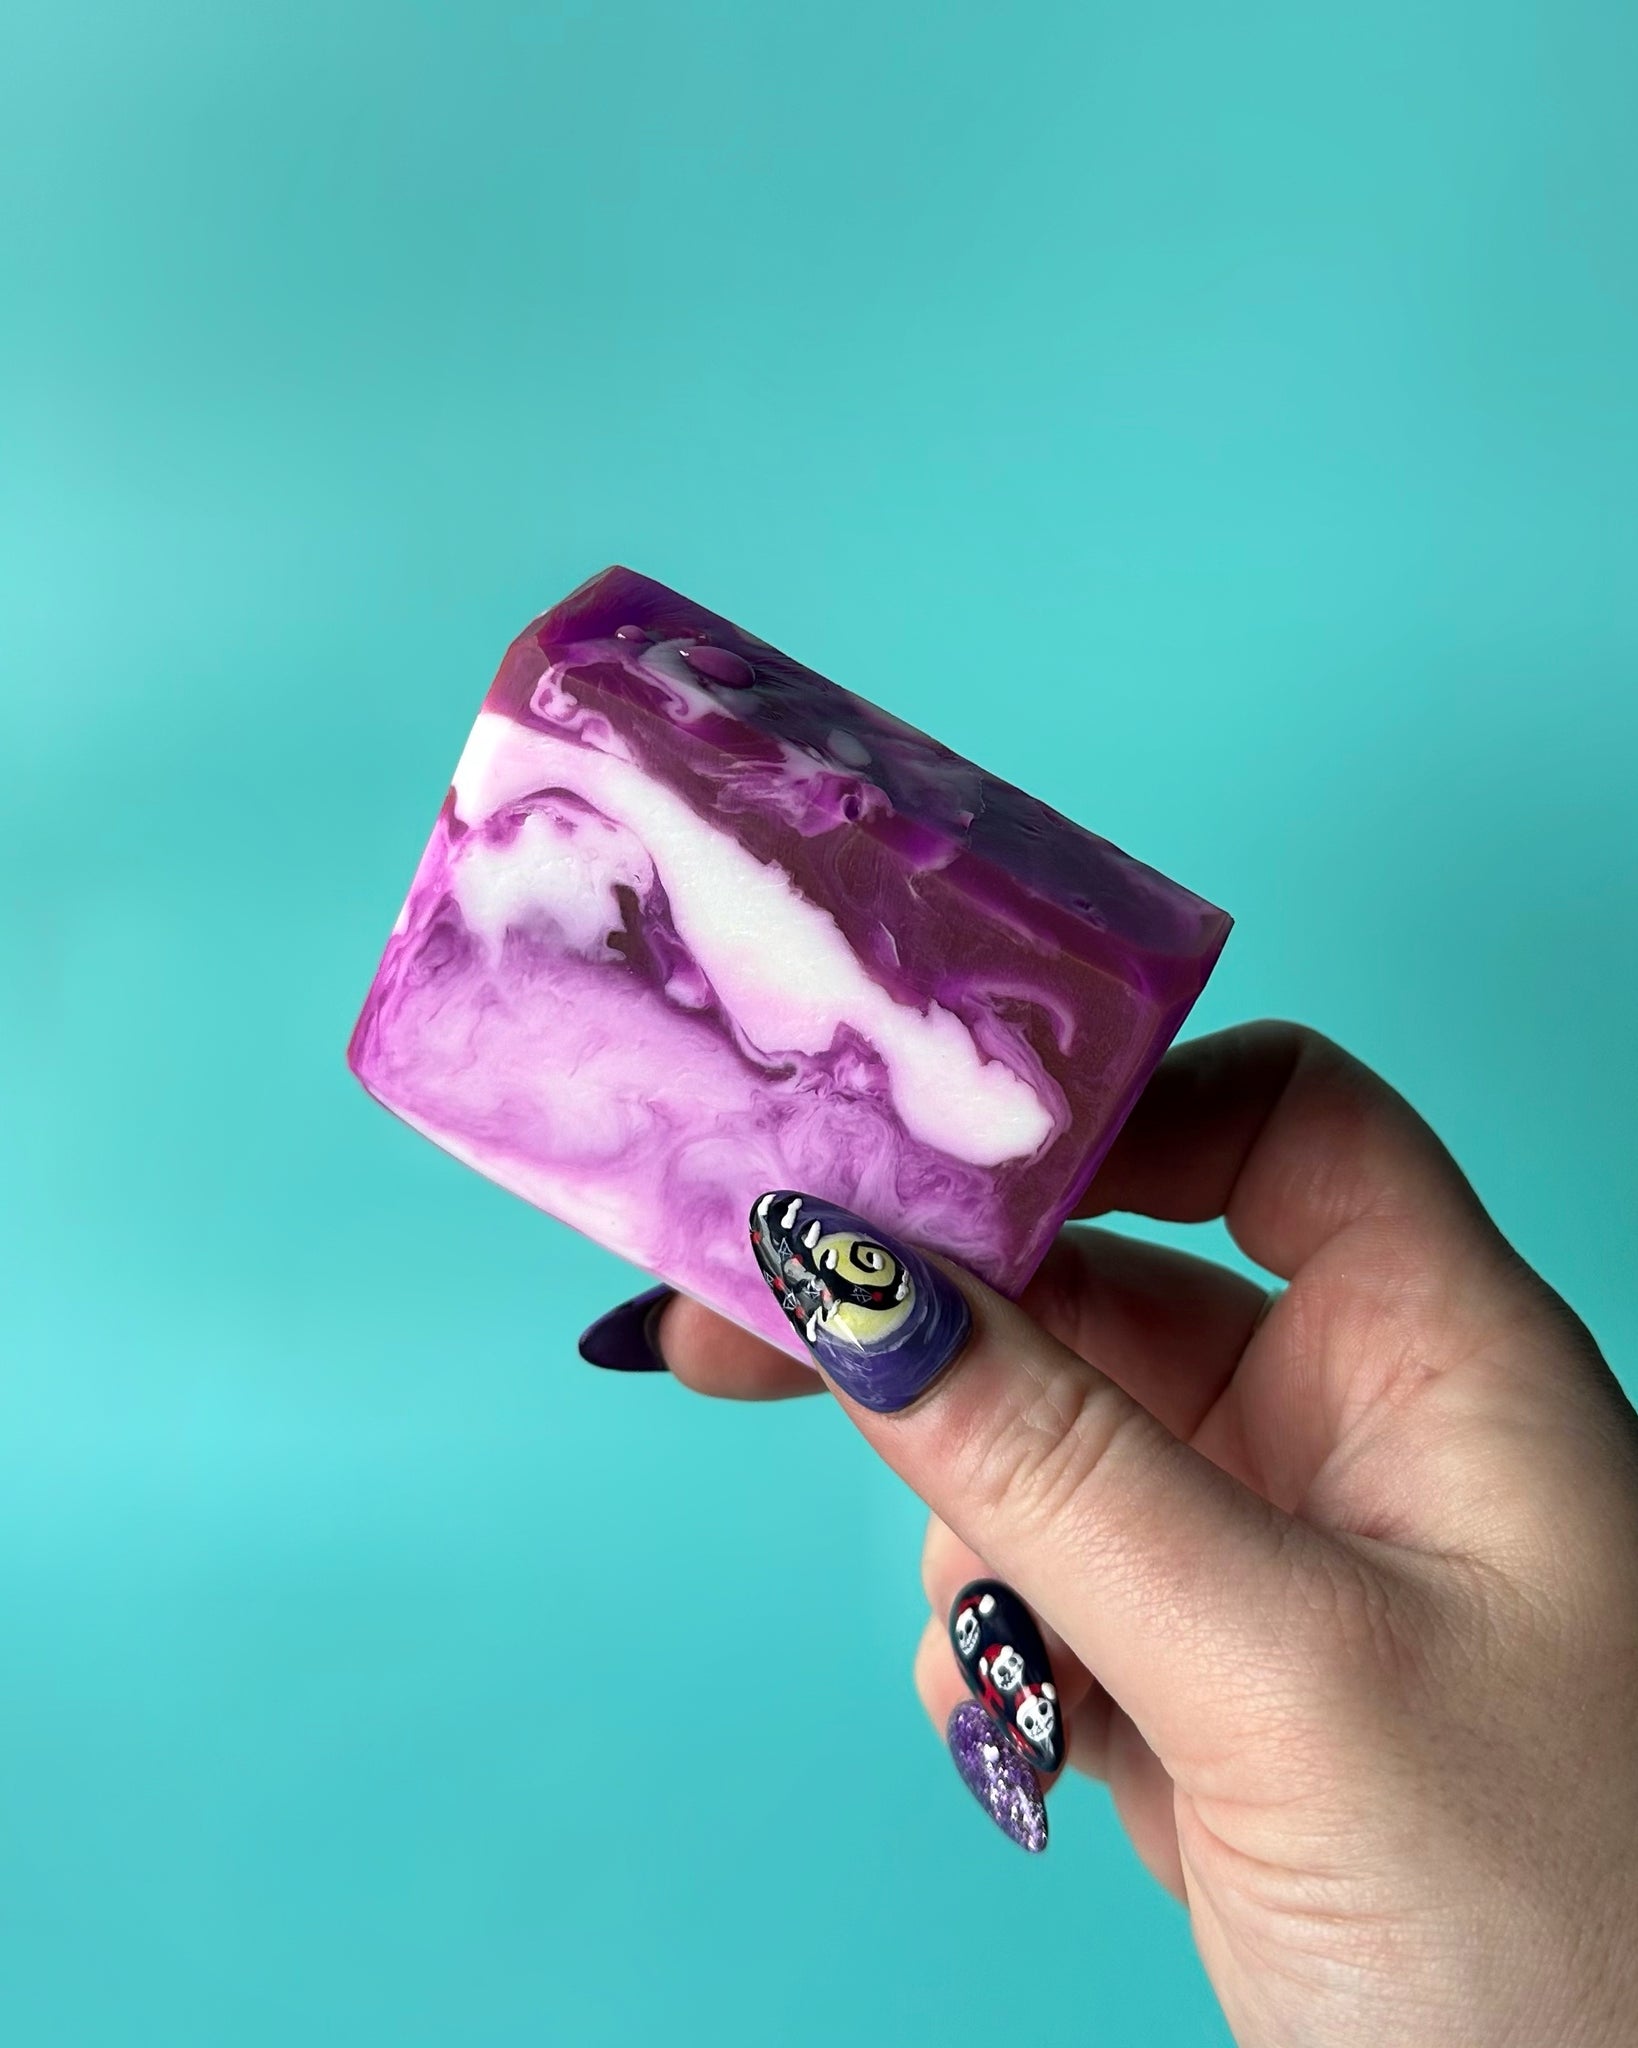 Spellbound soap bar - Lavender + Lily of the valley + oakmoss